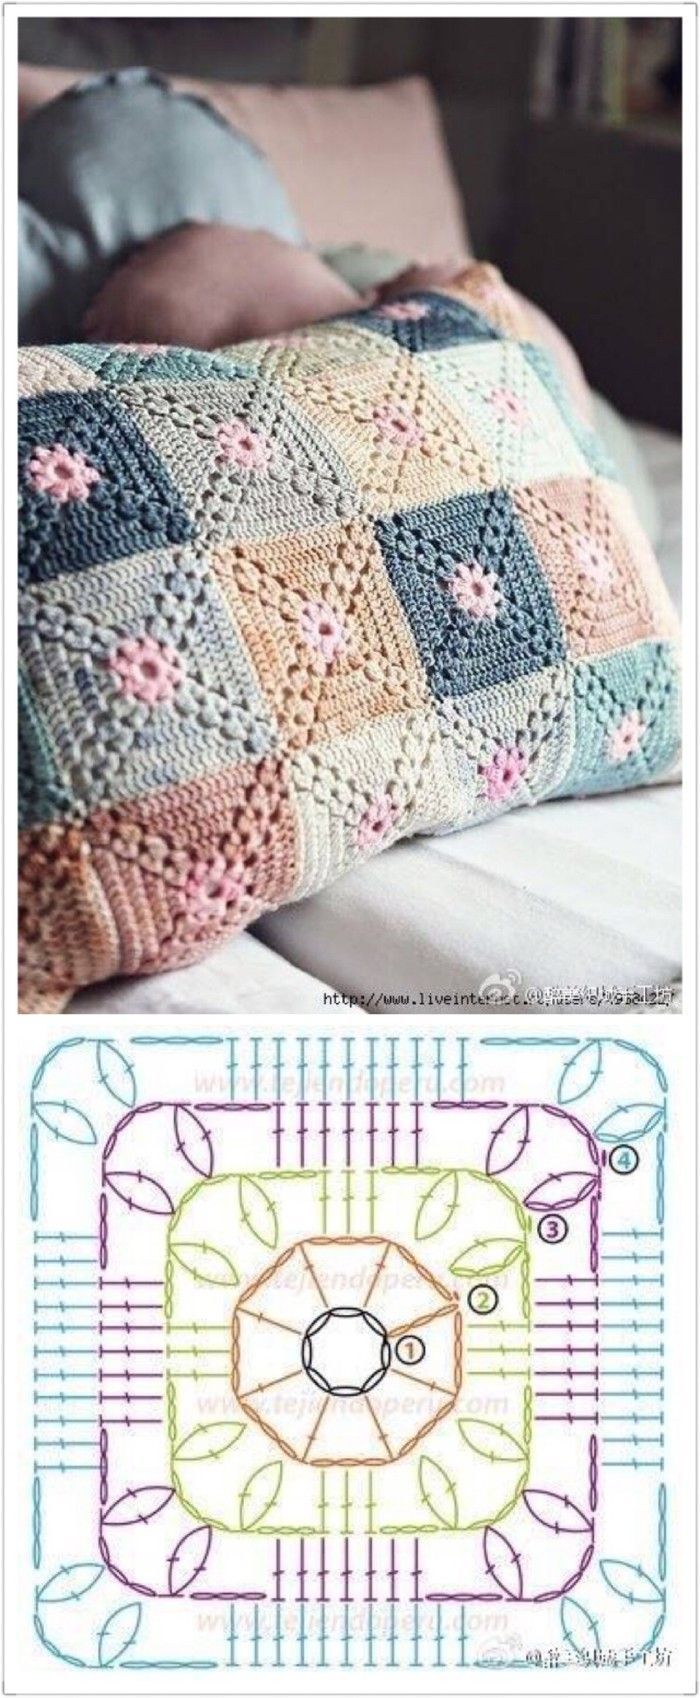 10-Transcendent-Crochet-Solid-Granny-Square-Ideas-That-You-Would.jpg